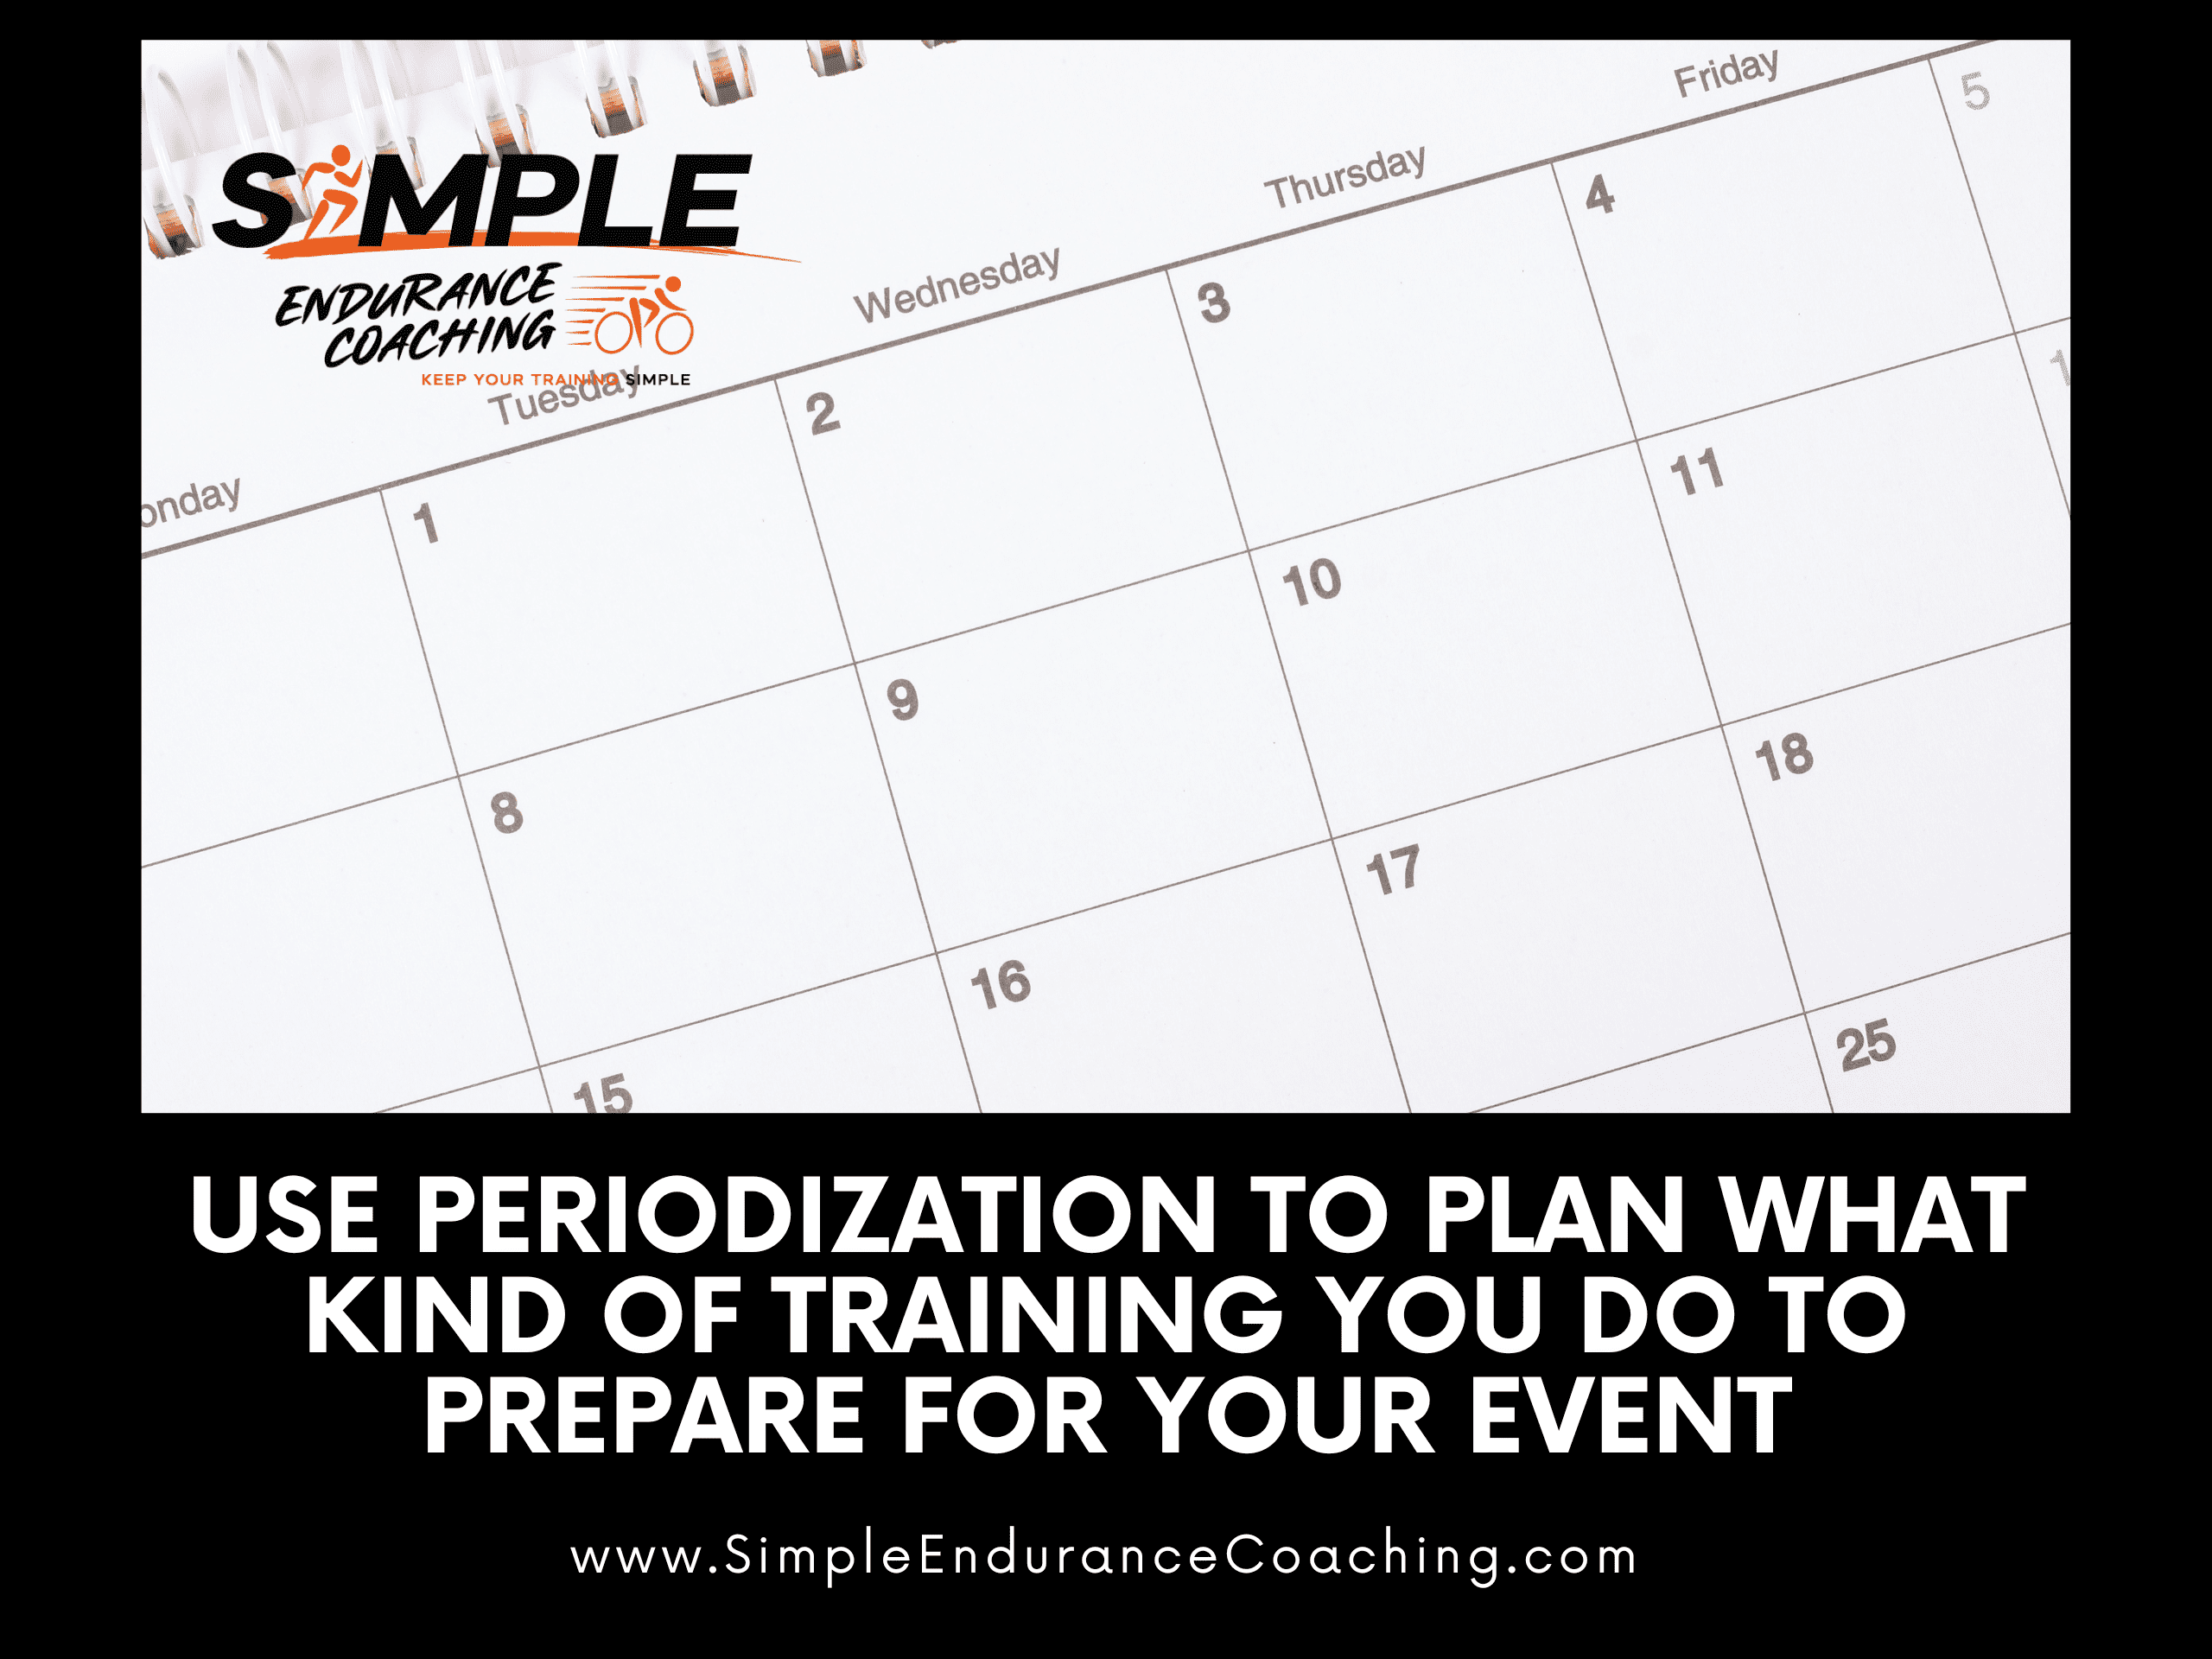 Use Periodization to Plan What Kind of Training You Do To Prepare for Your Event